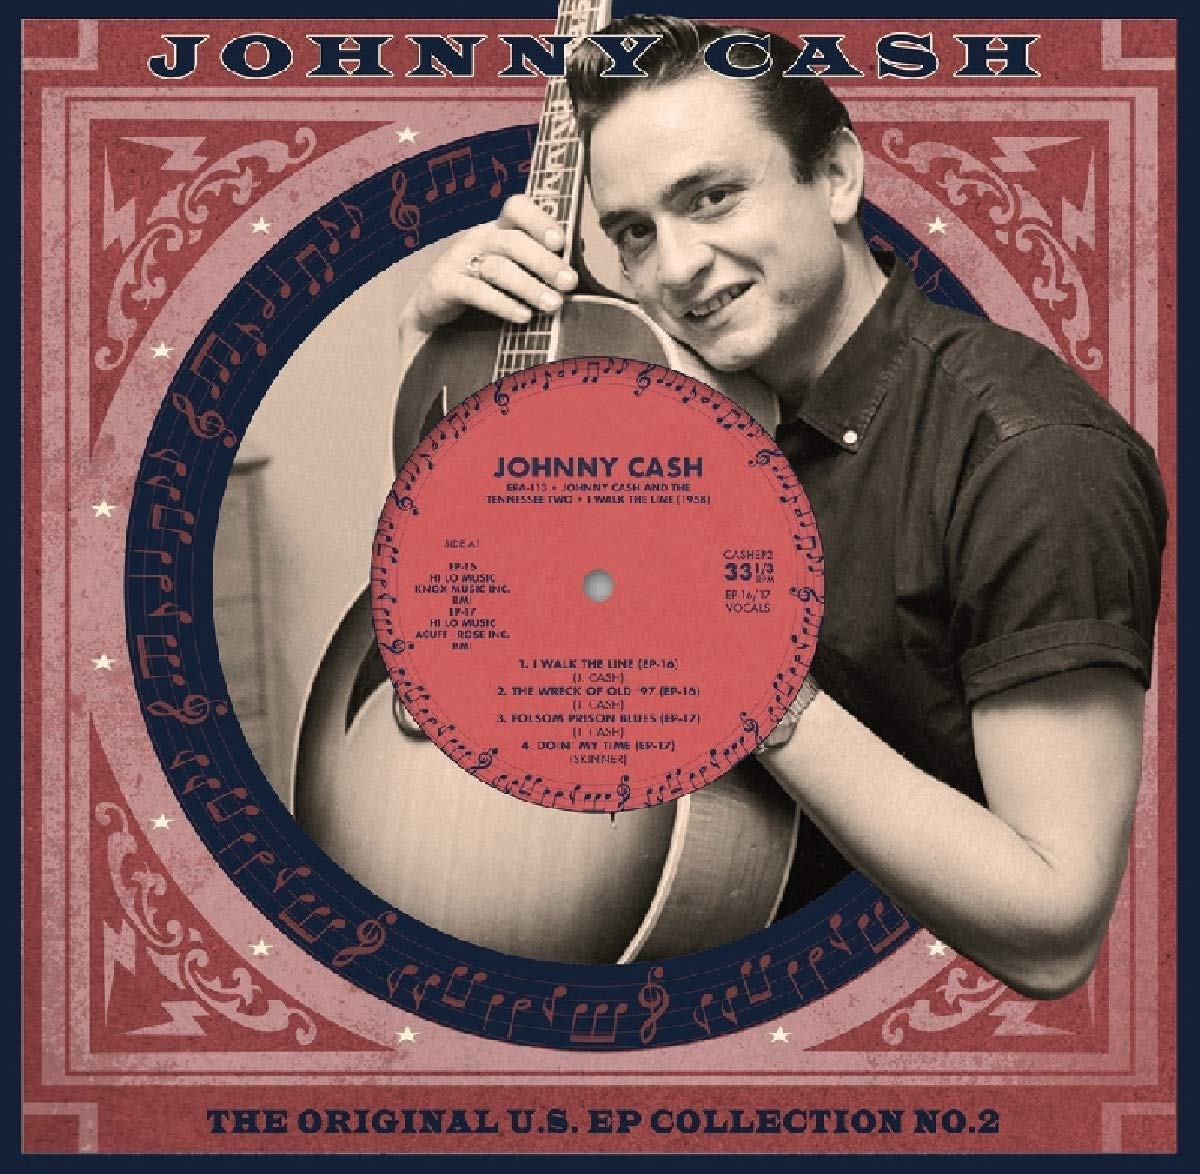 JOHNNY CASH / ジョニー・キャッシュ / THE ORIGINAL U.S. EP COLLECTION NO.2 (COLORED 10")